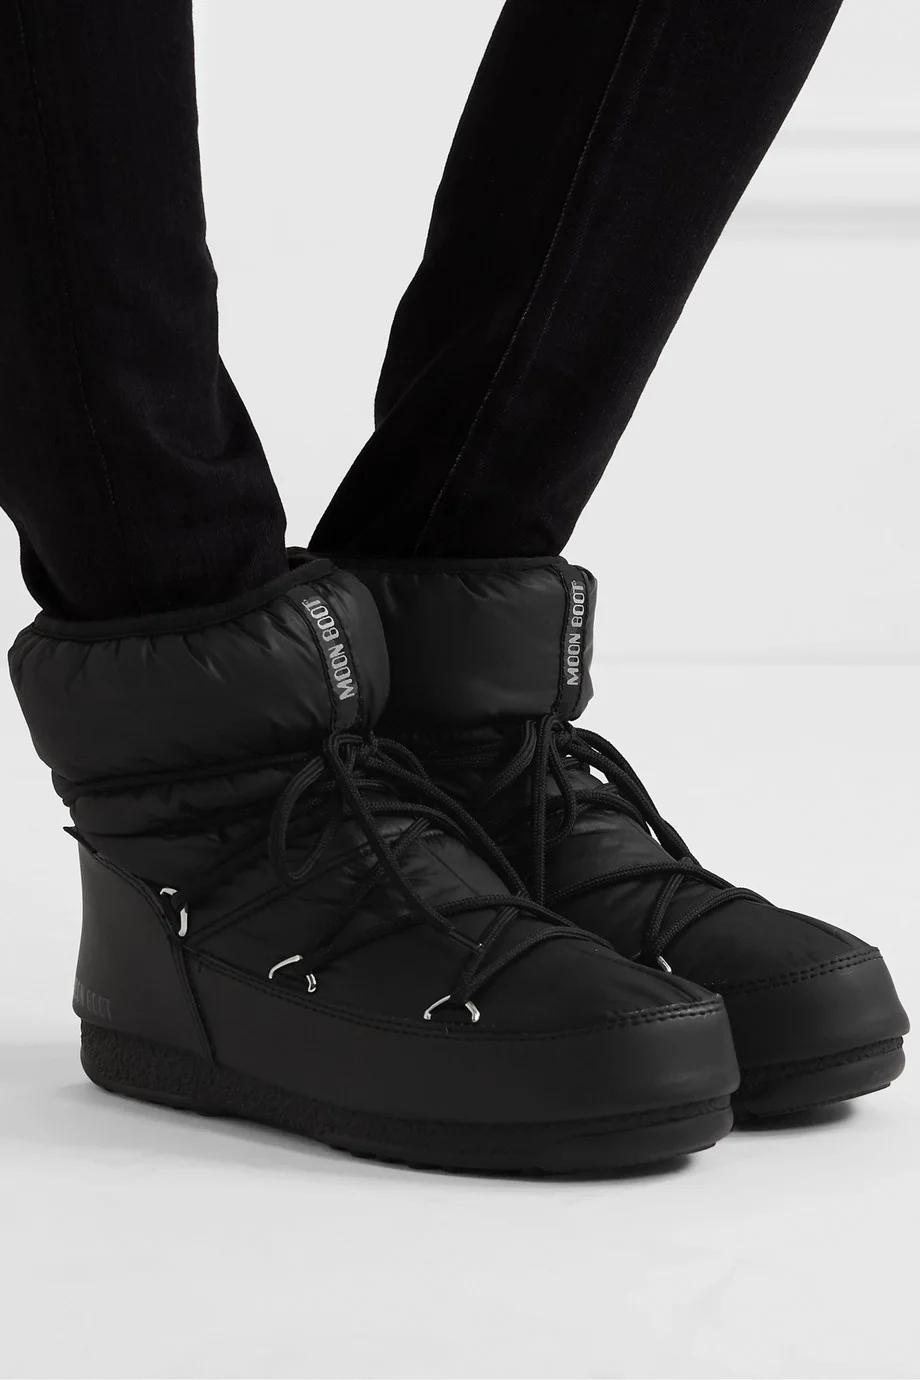 Low Nylon WP 2 Snow Boots in Black - Moon Boot